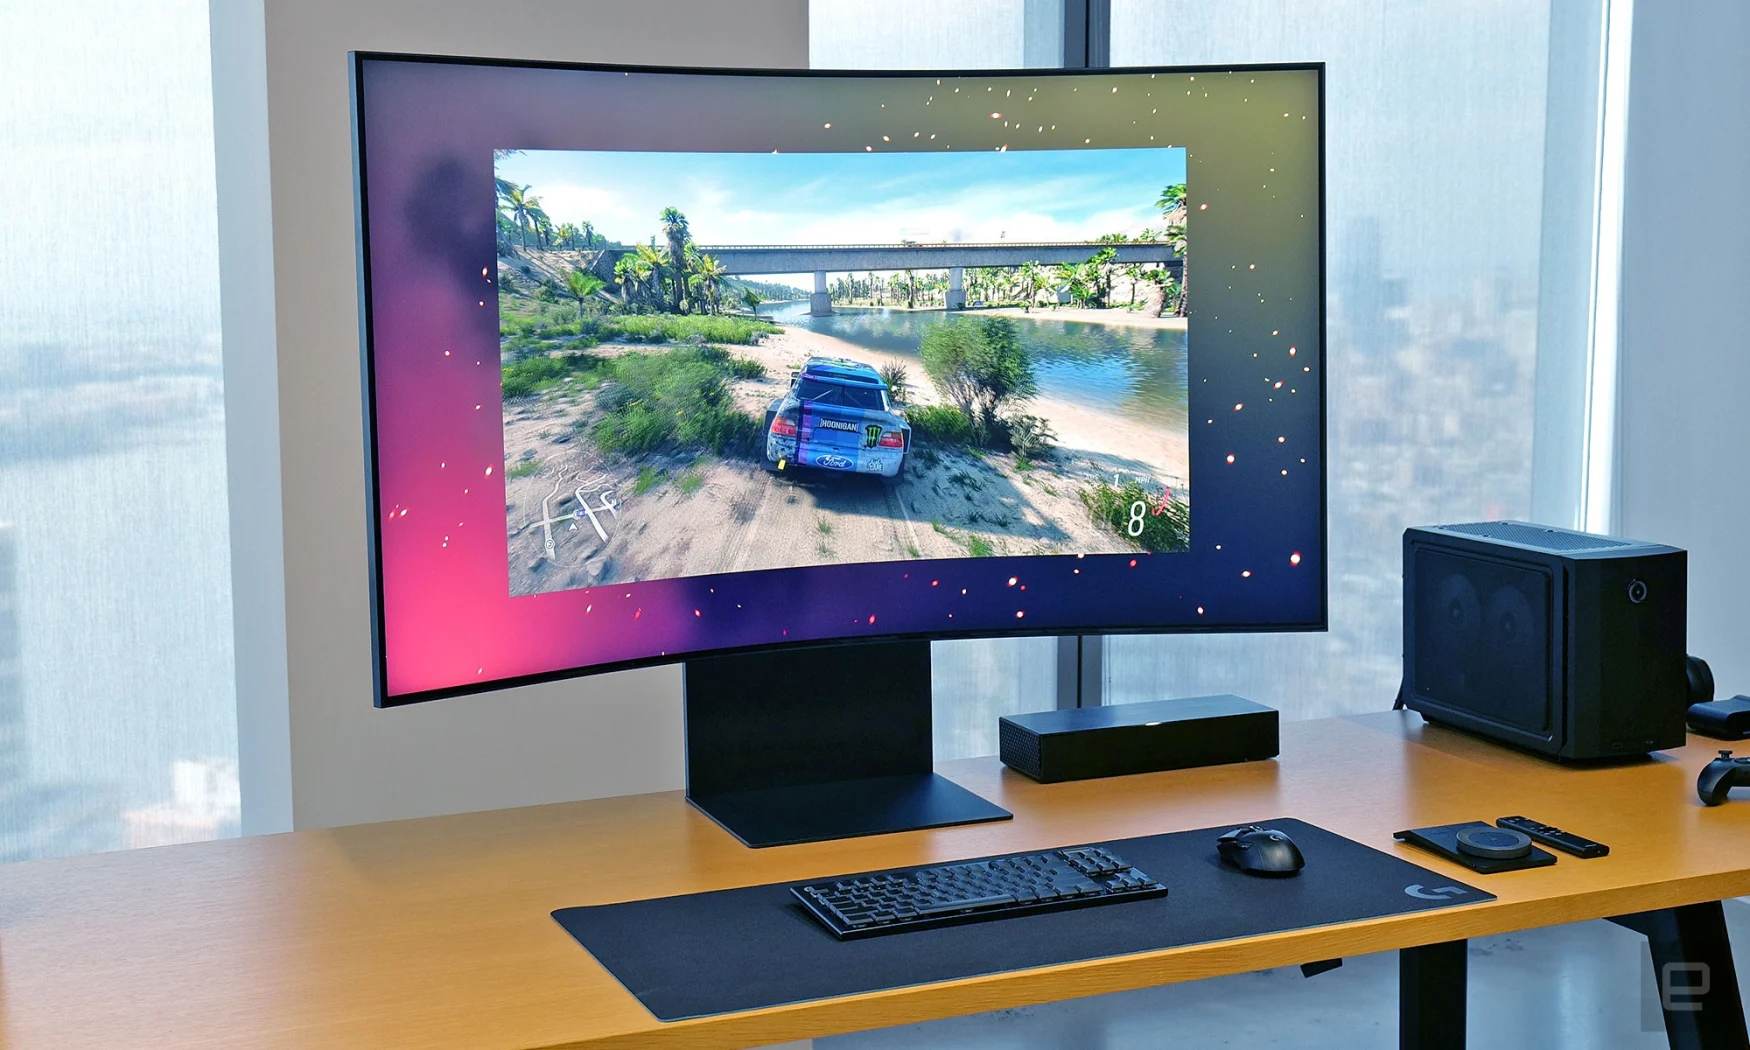 With a massive 55-inch 4K display, Samsung's Odyssey Ark is one of the biggest gaming monitors on the market. 